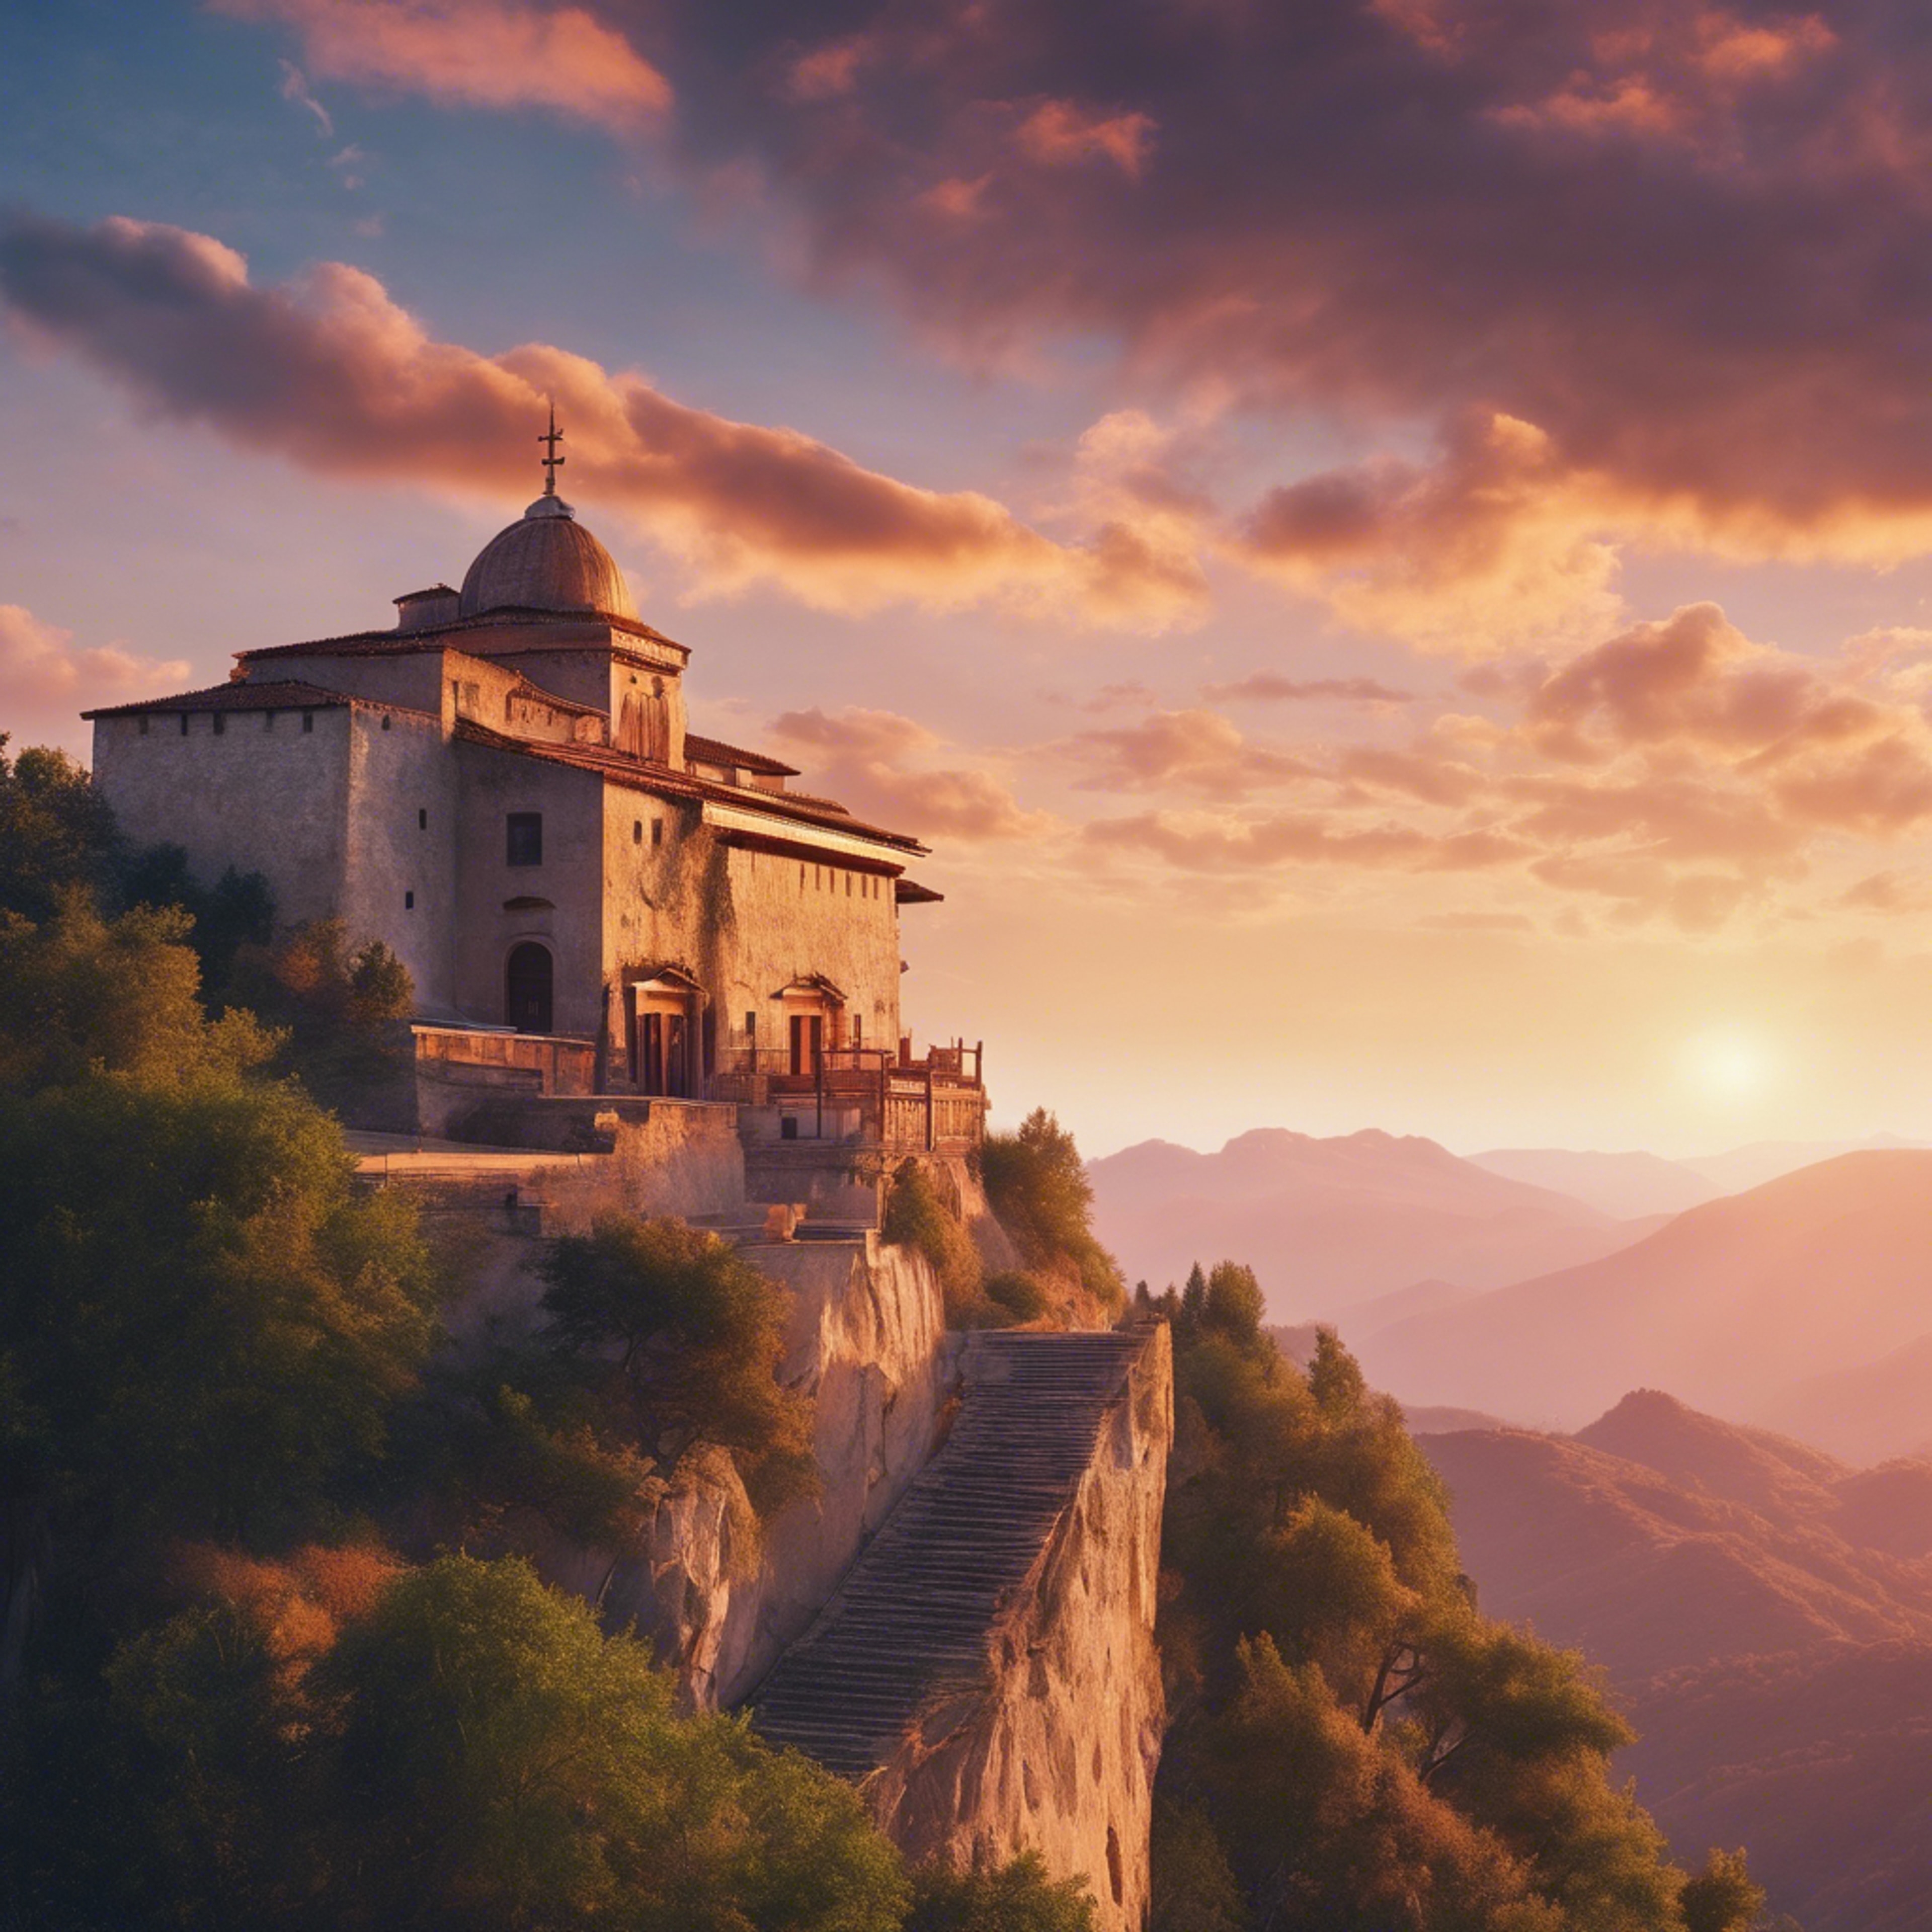 A quiet monastery perched high on a mountain, under the blend of beautiful sunset colors.壁紙[600c6907833a4be197a4]